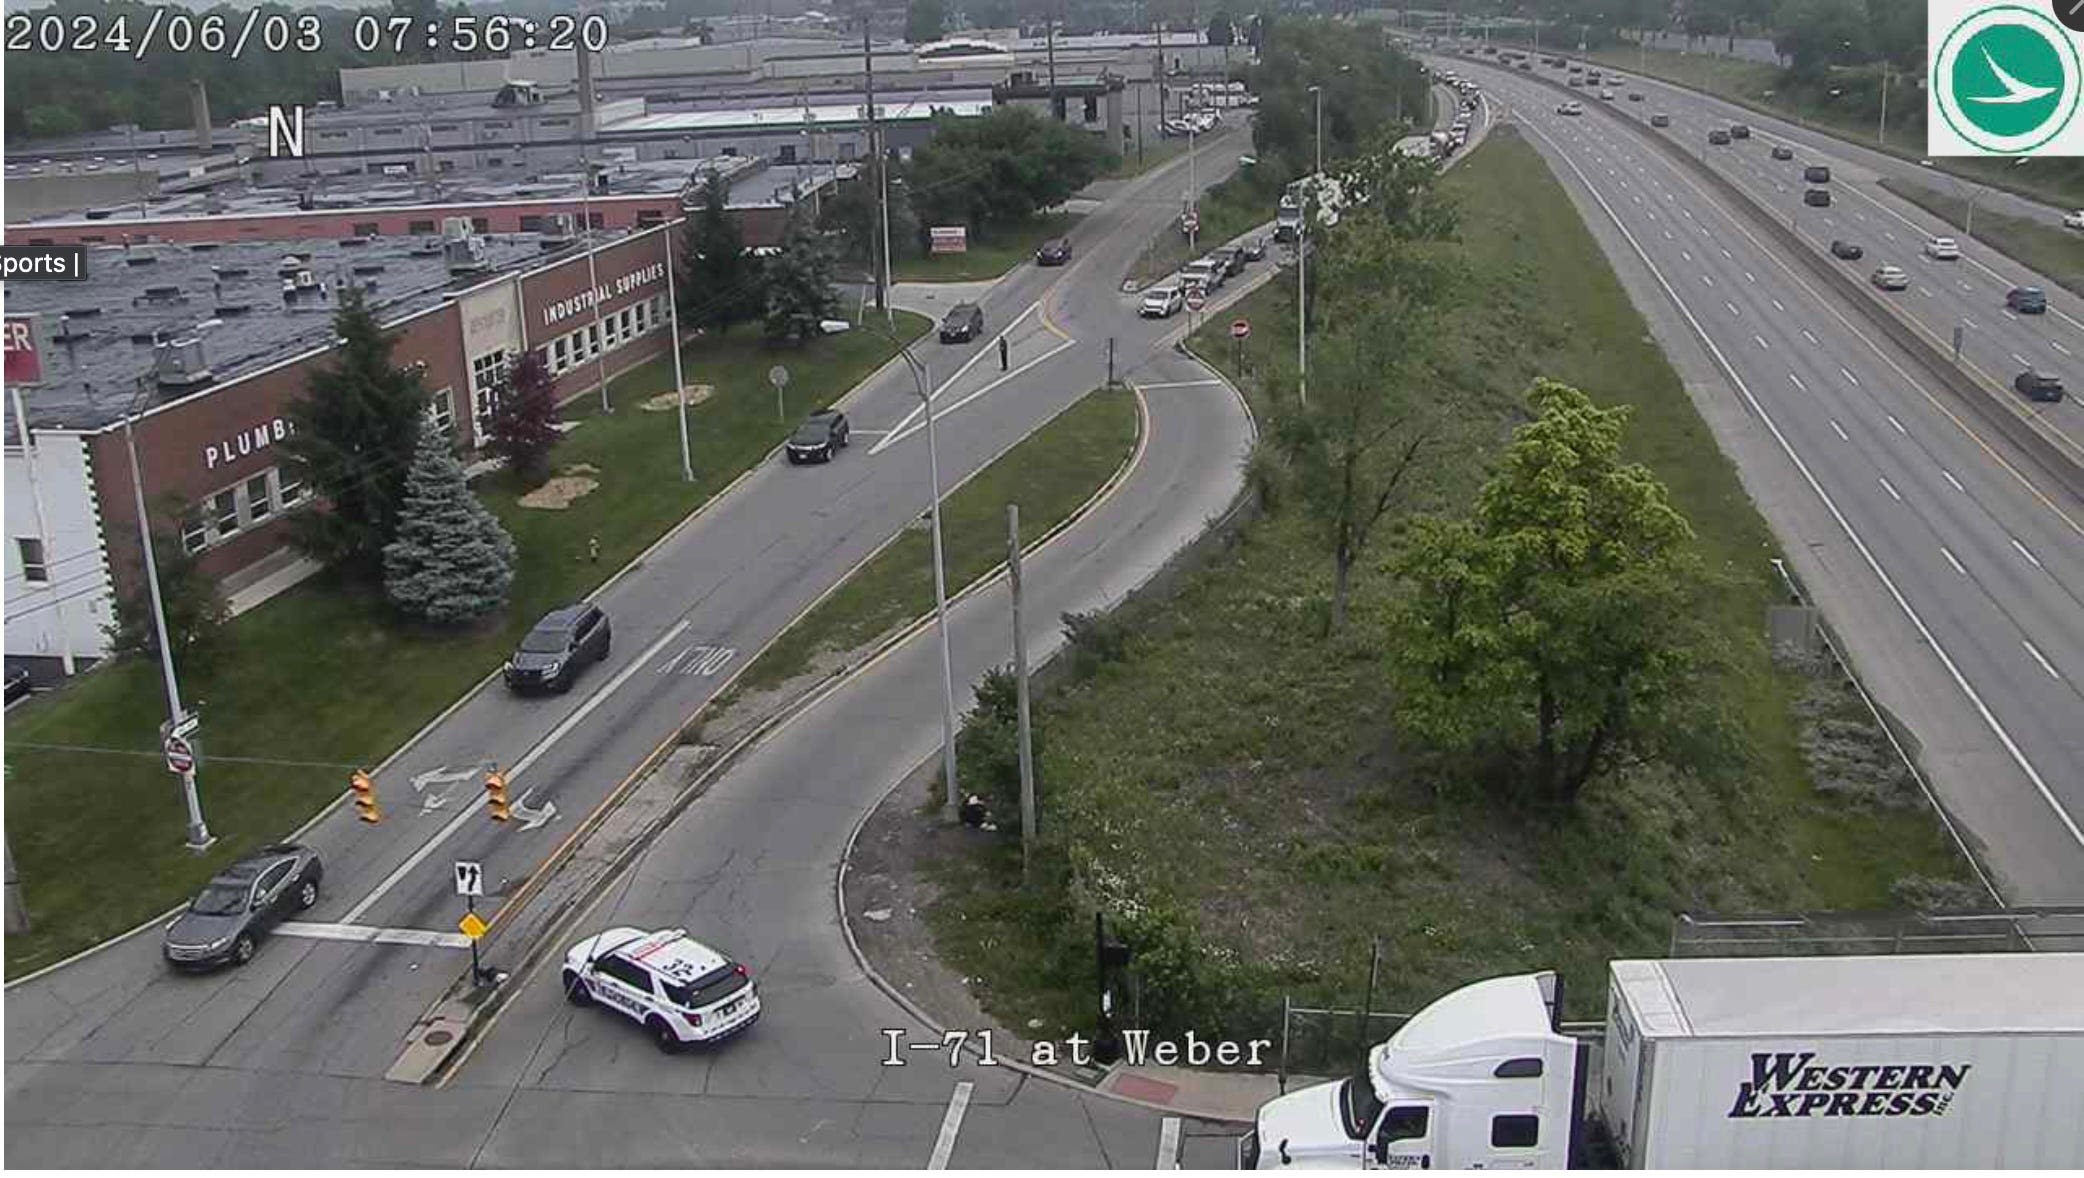 Interstate 71 near Weber Road and I-270 closed due to pedestrian death investigation